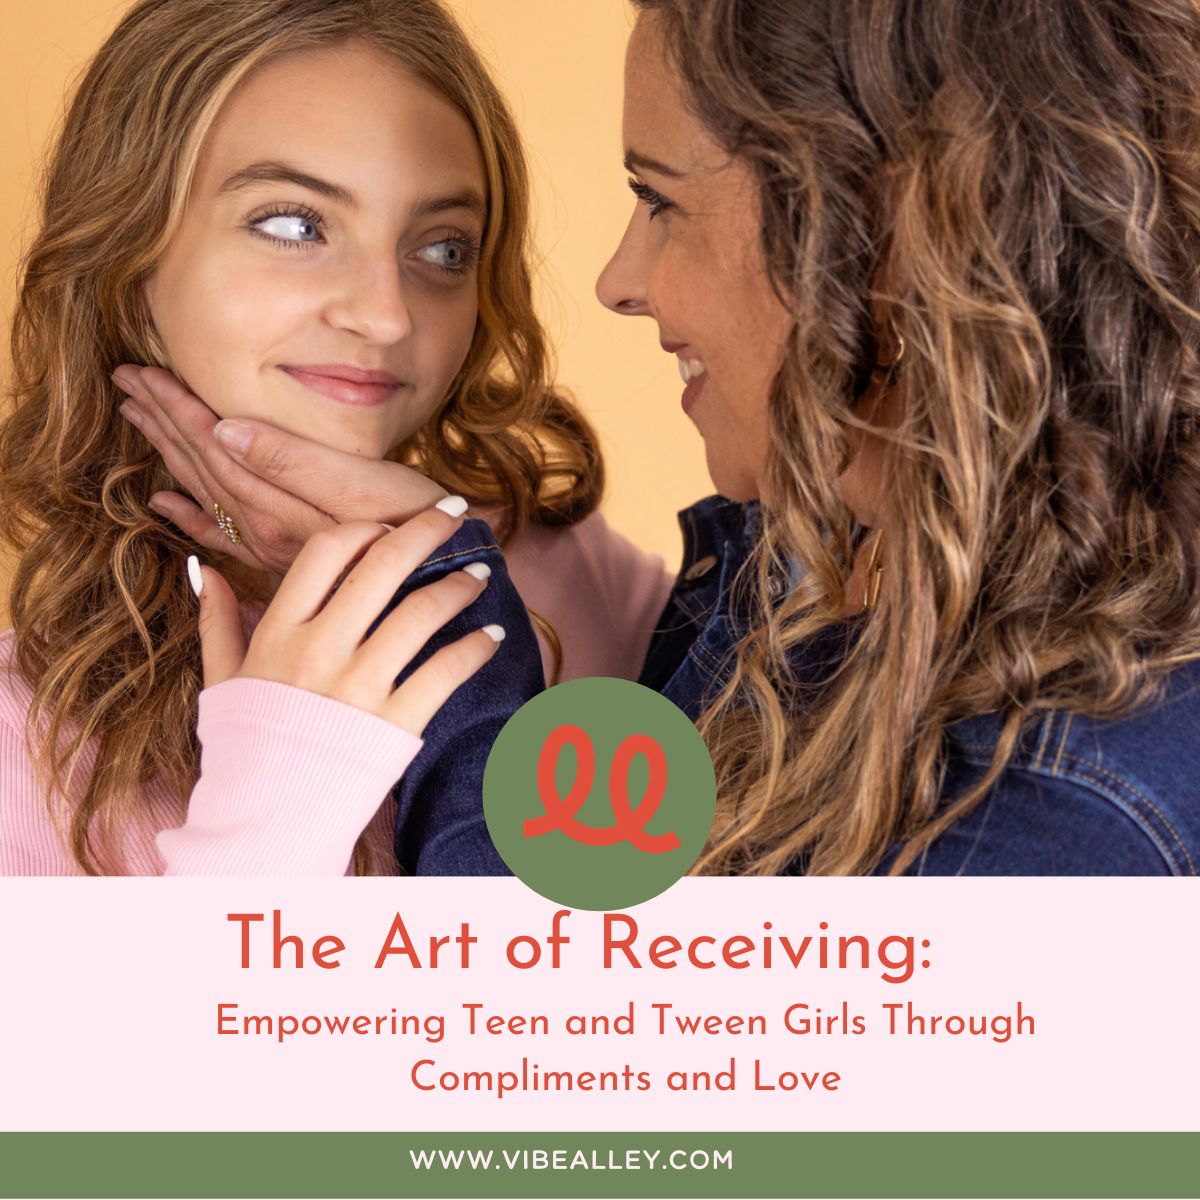 The Art of Receiving: Empowering Teen and Tween Girls Through Compliments and Love